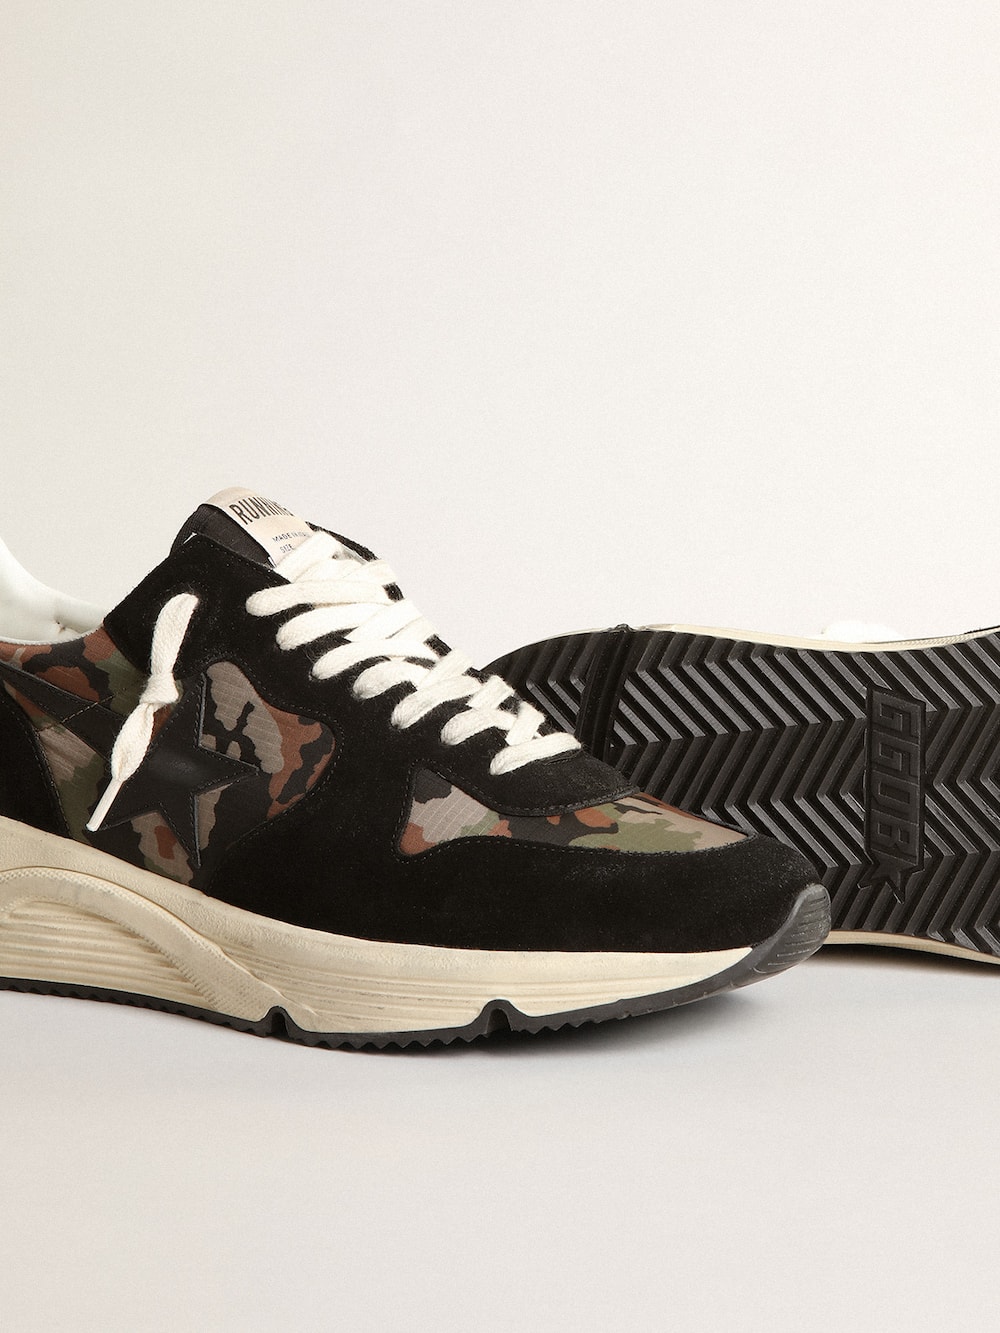 Golden Goose - Running Sole Uomo in nylon ripstop con stampa camouflage  in 